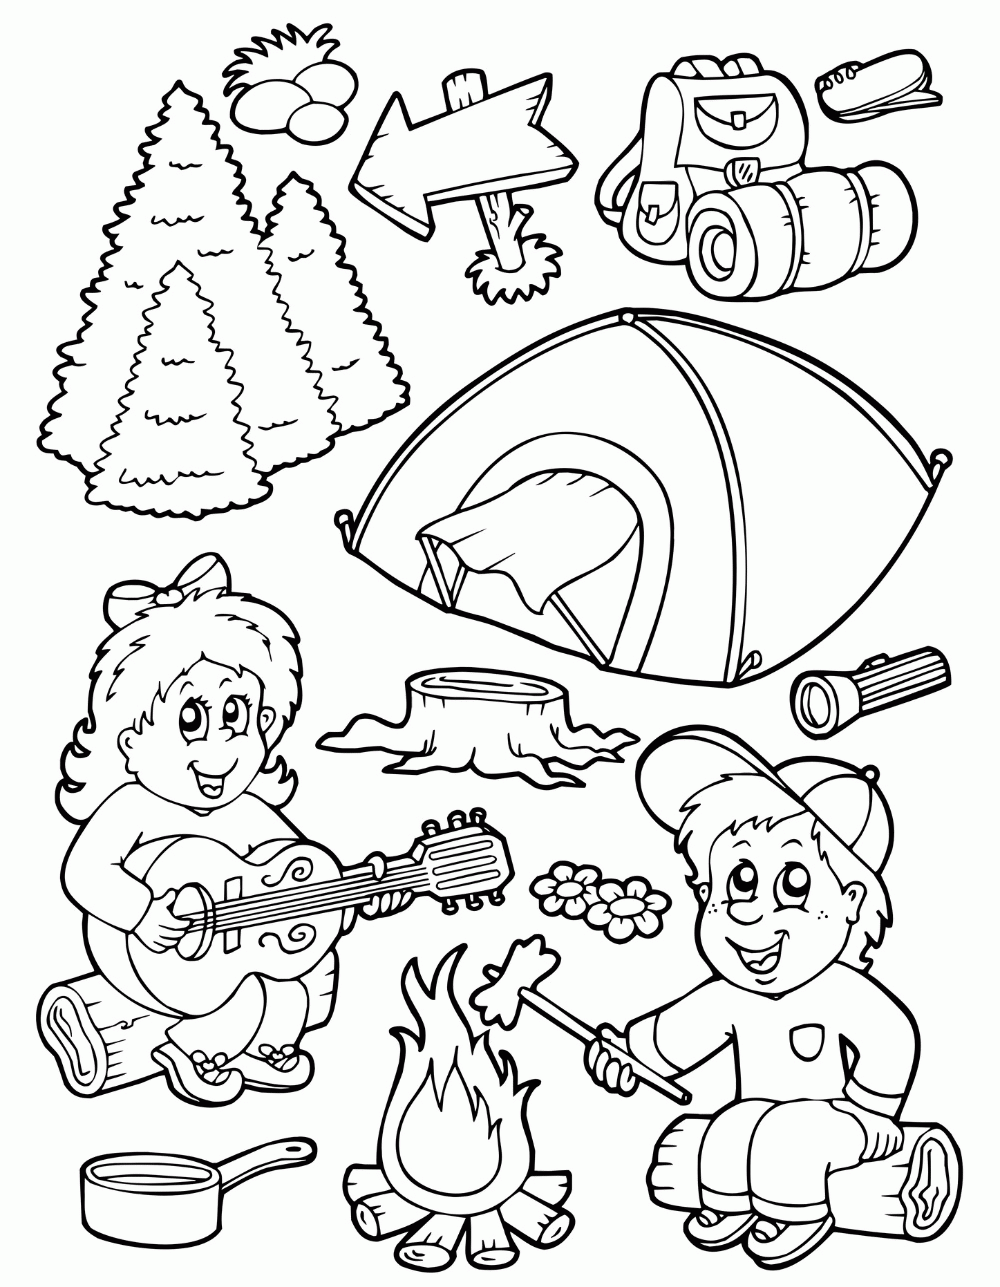 Coloring Page Camping - Coloring Pages for Kids and for Adults